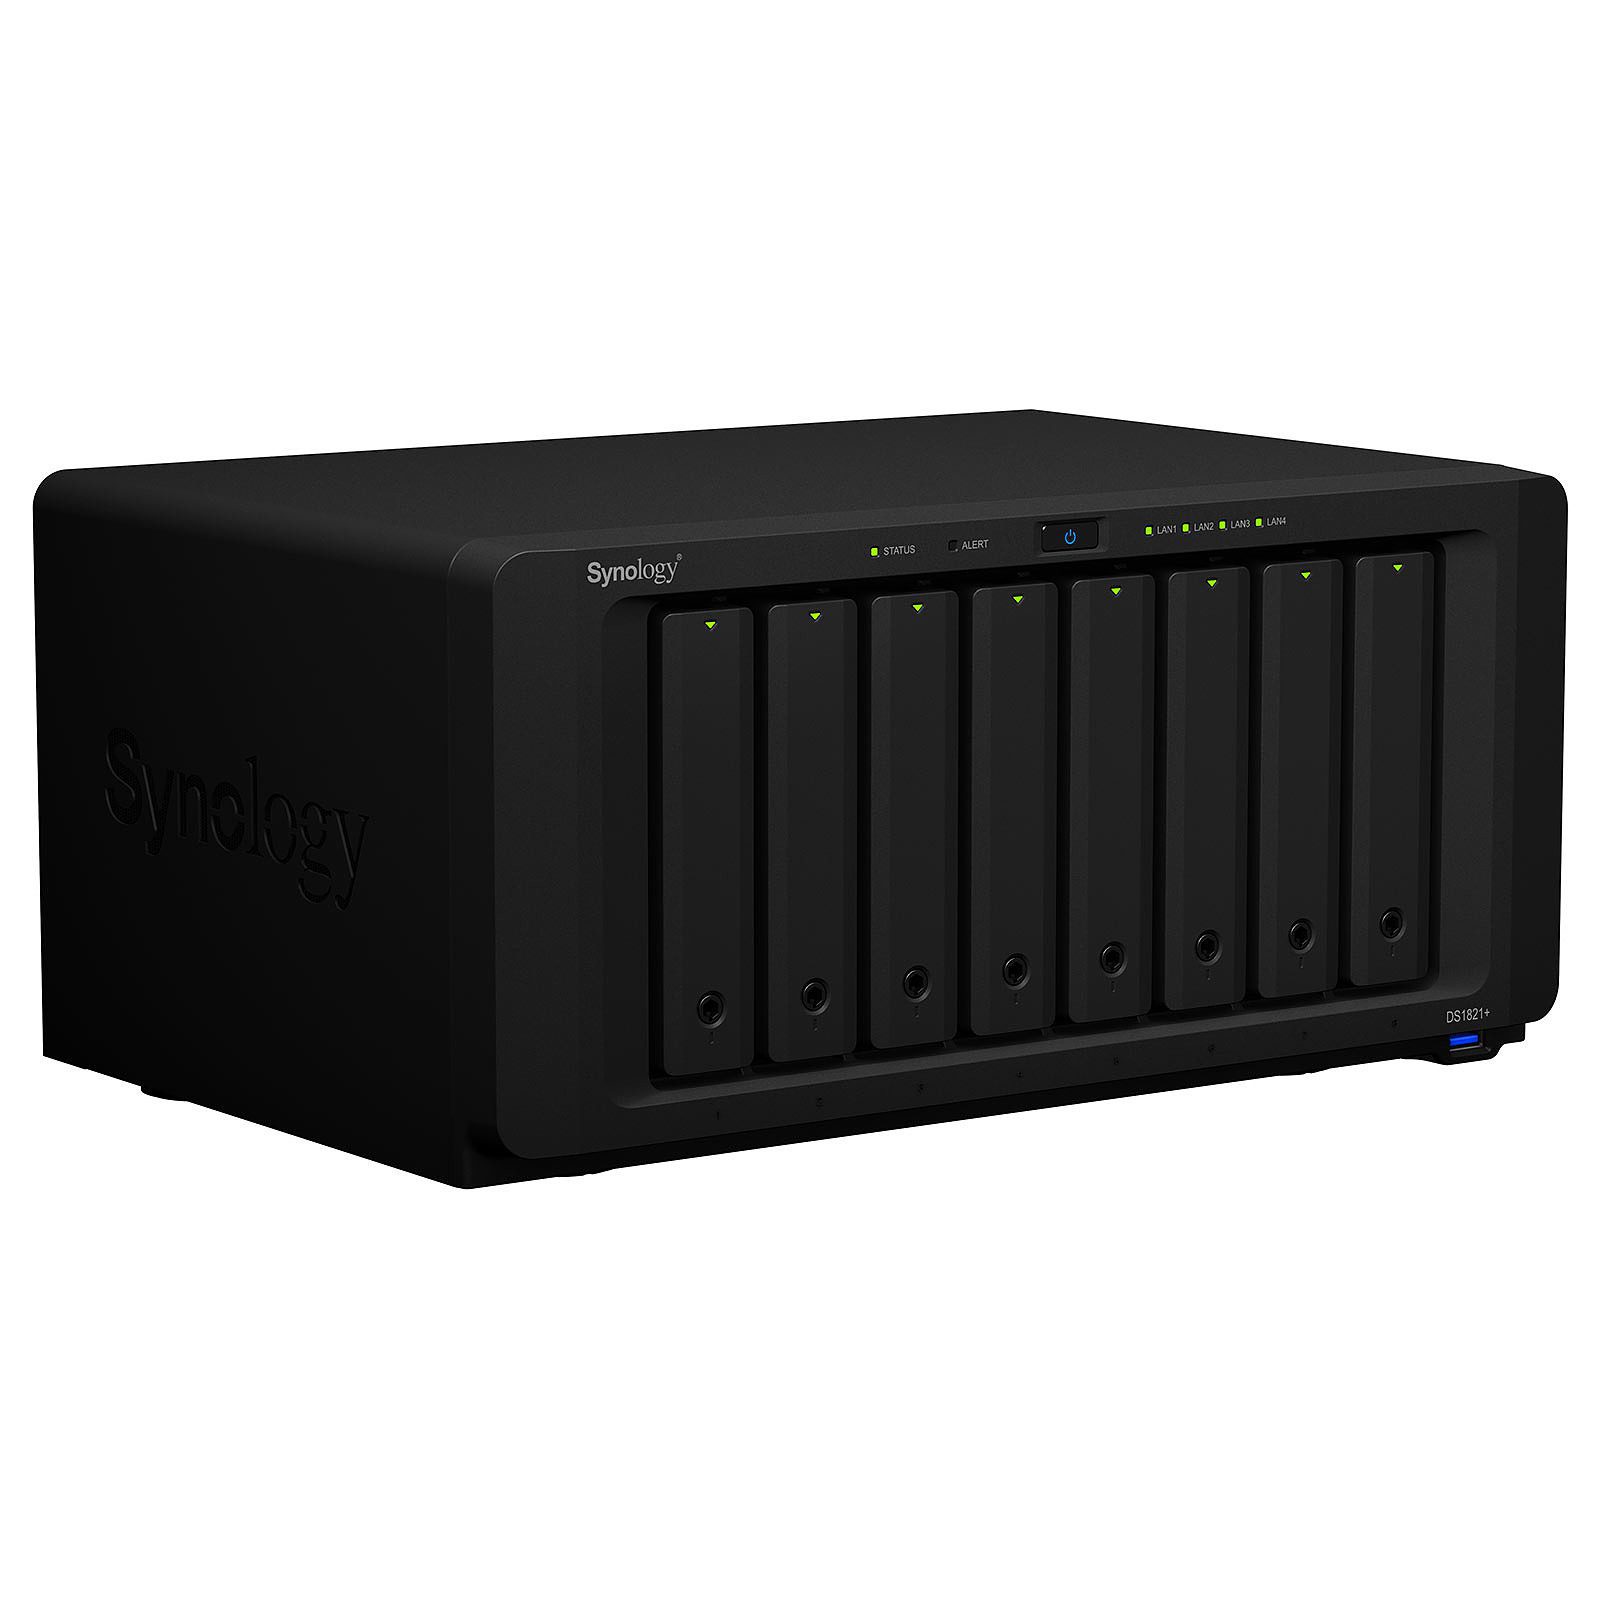 Synology lanceert 8-bay DiskStation DS1821+ - ITdaily.